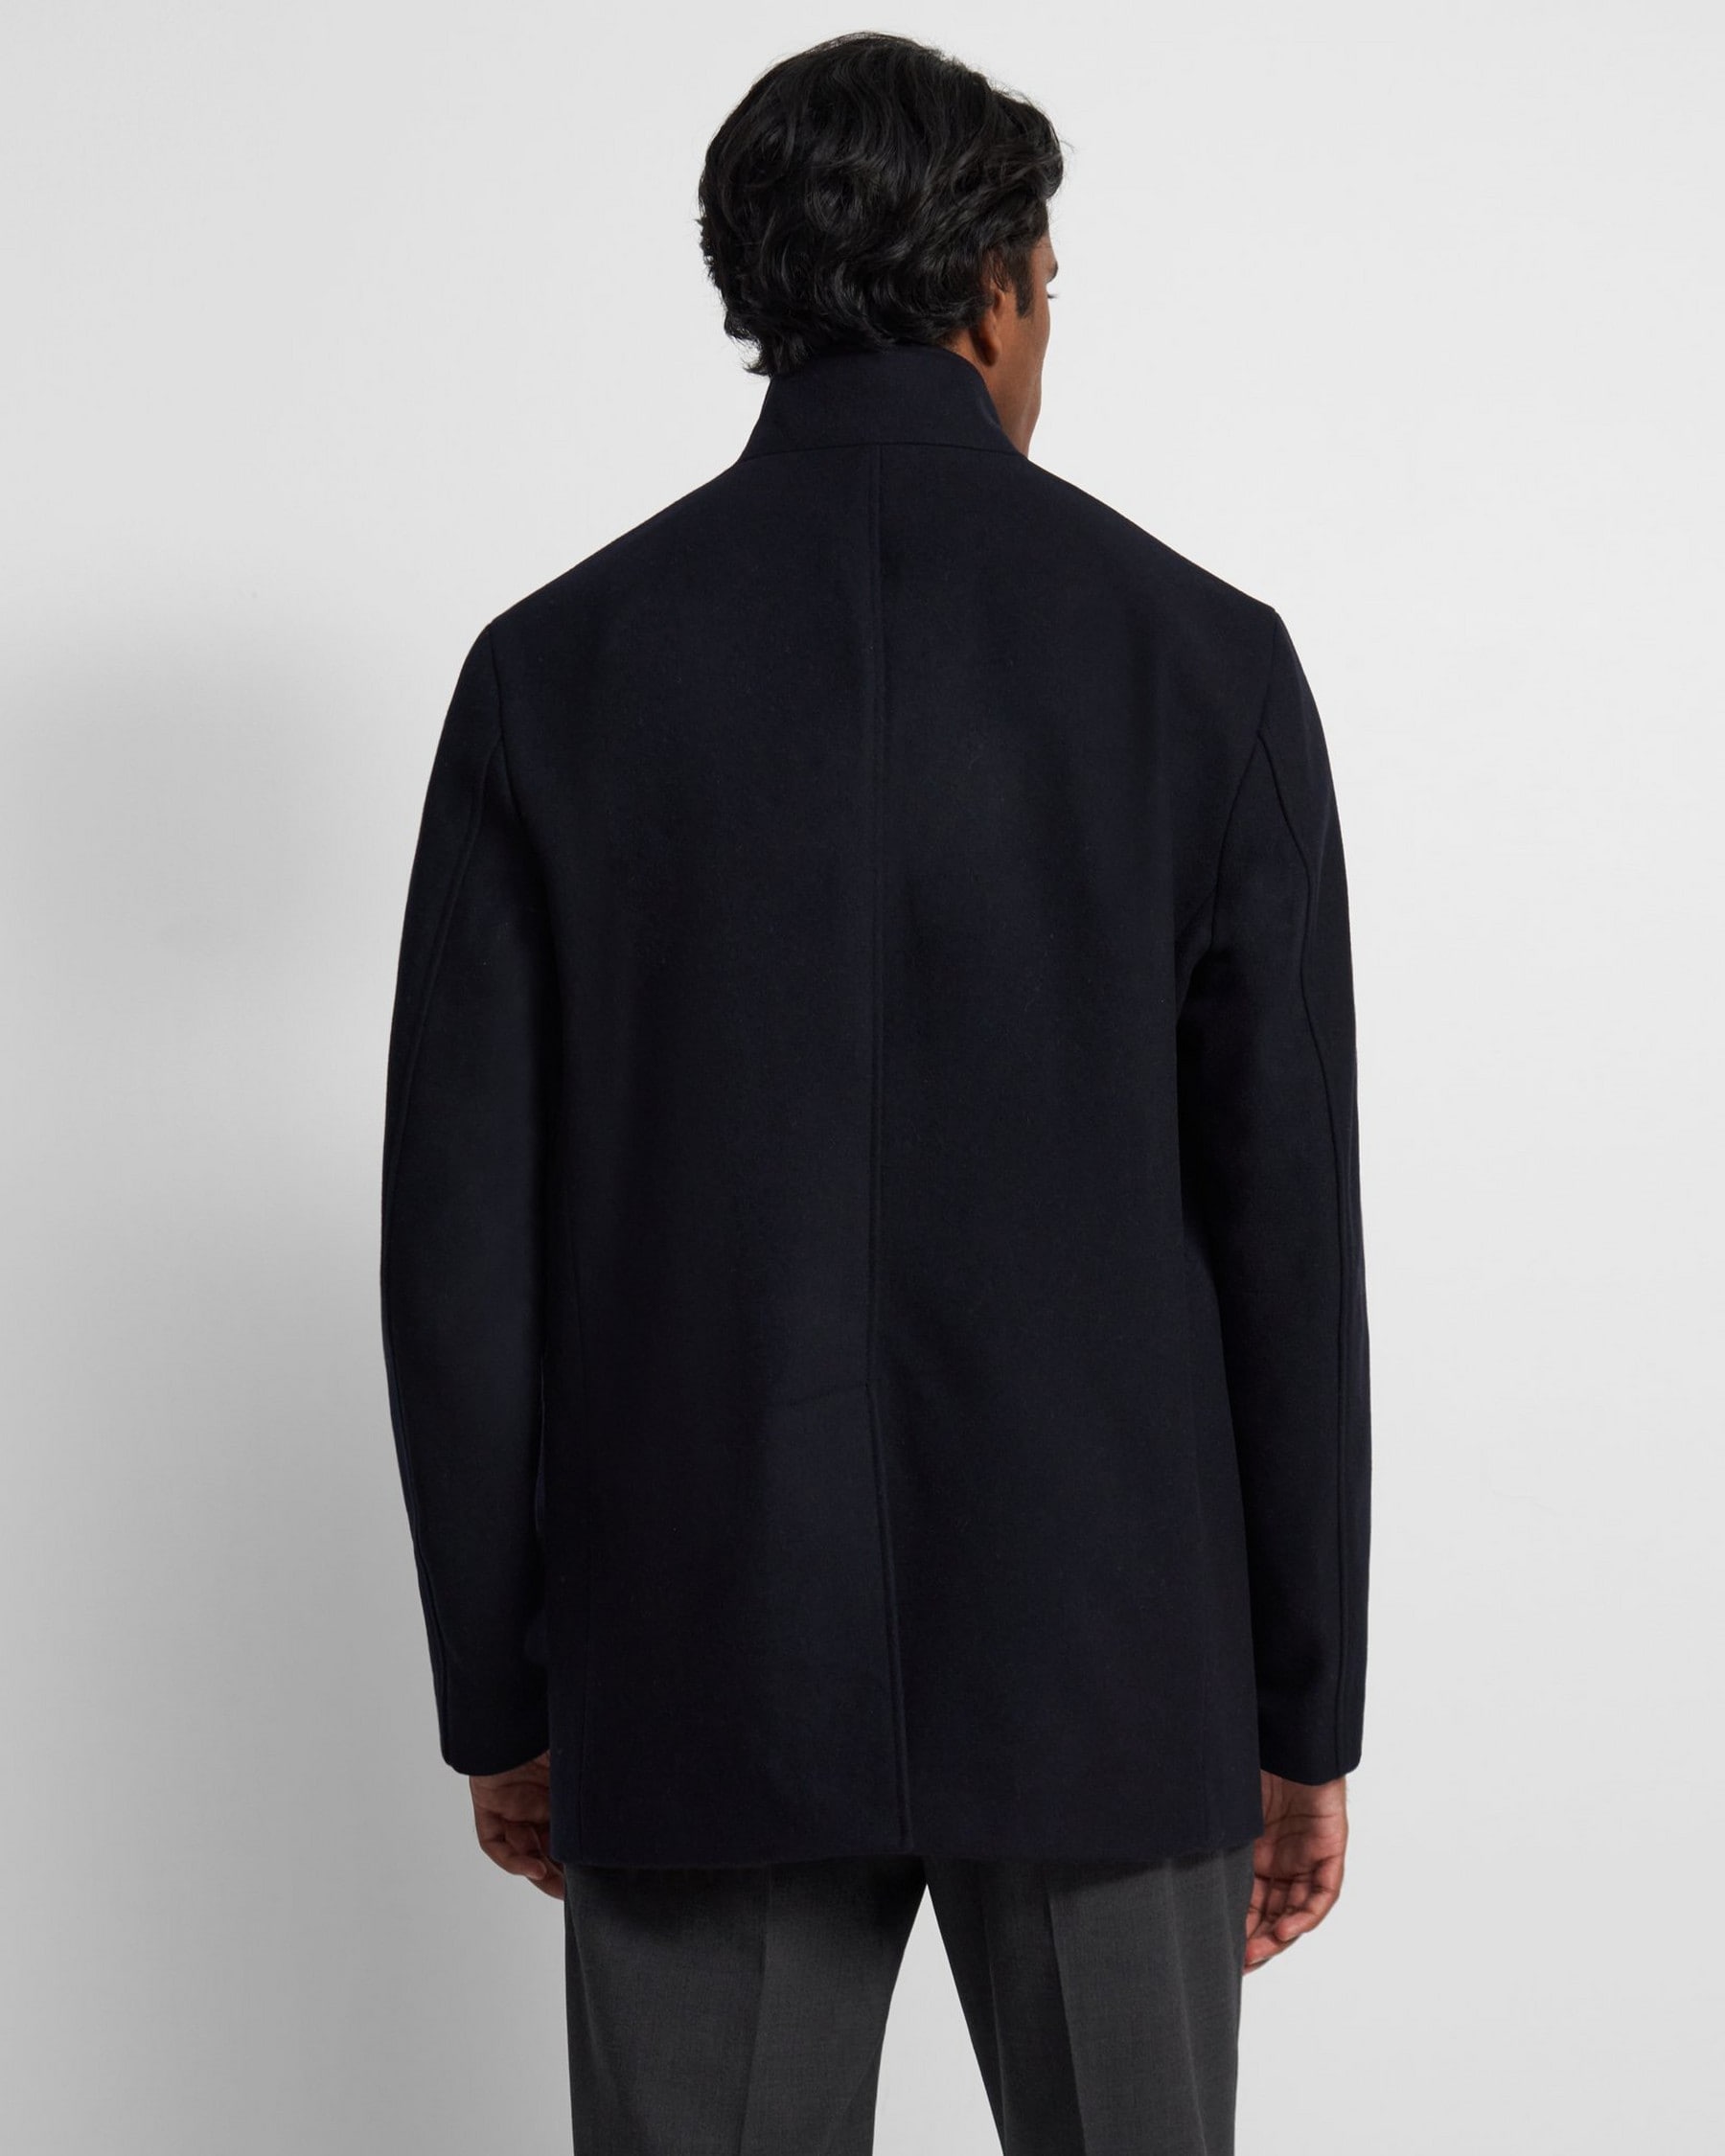 Clarence Jacket in Stretch Melton Wool